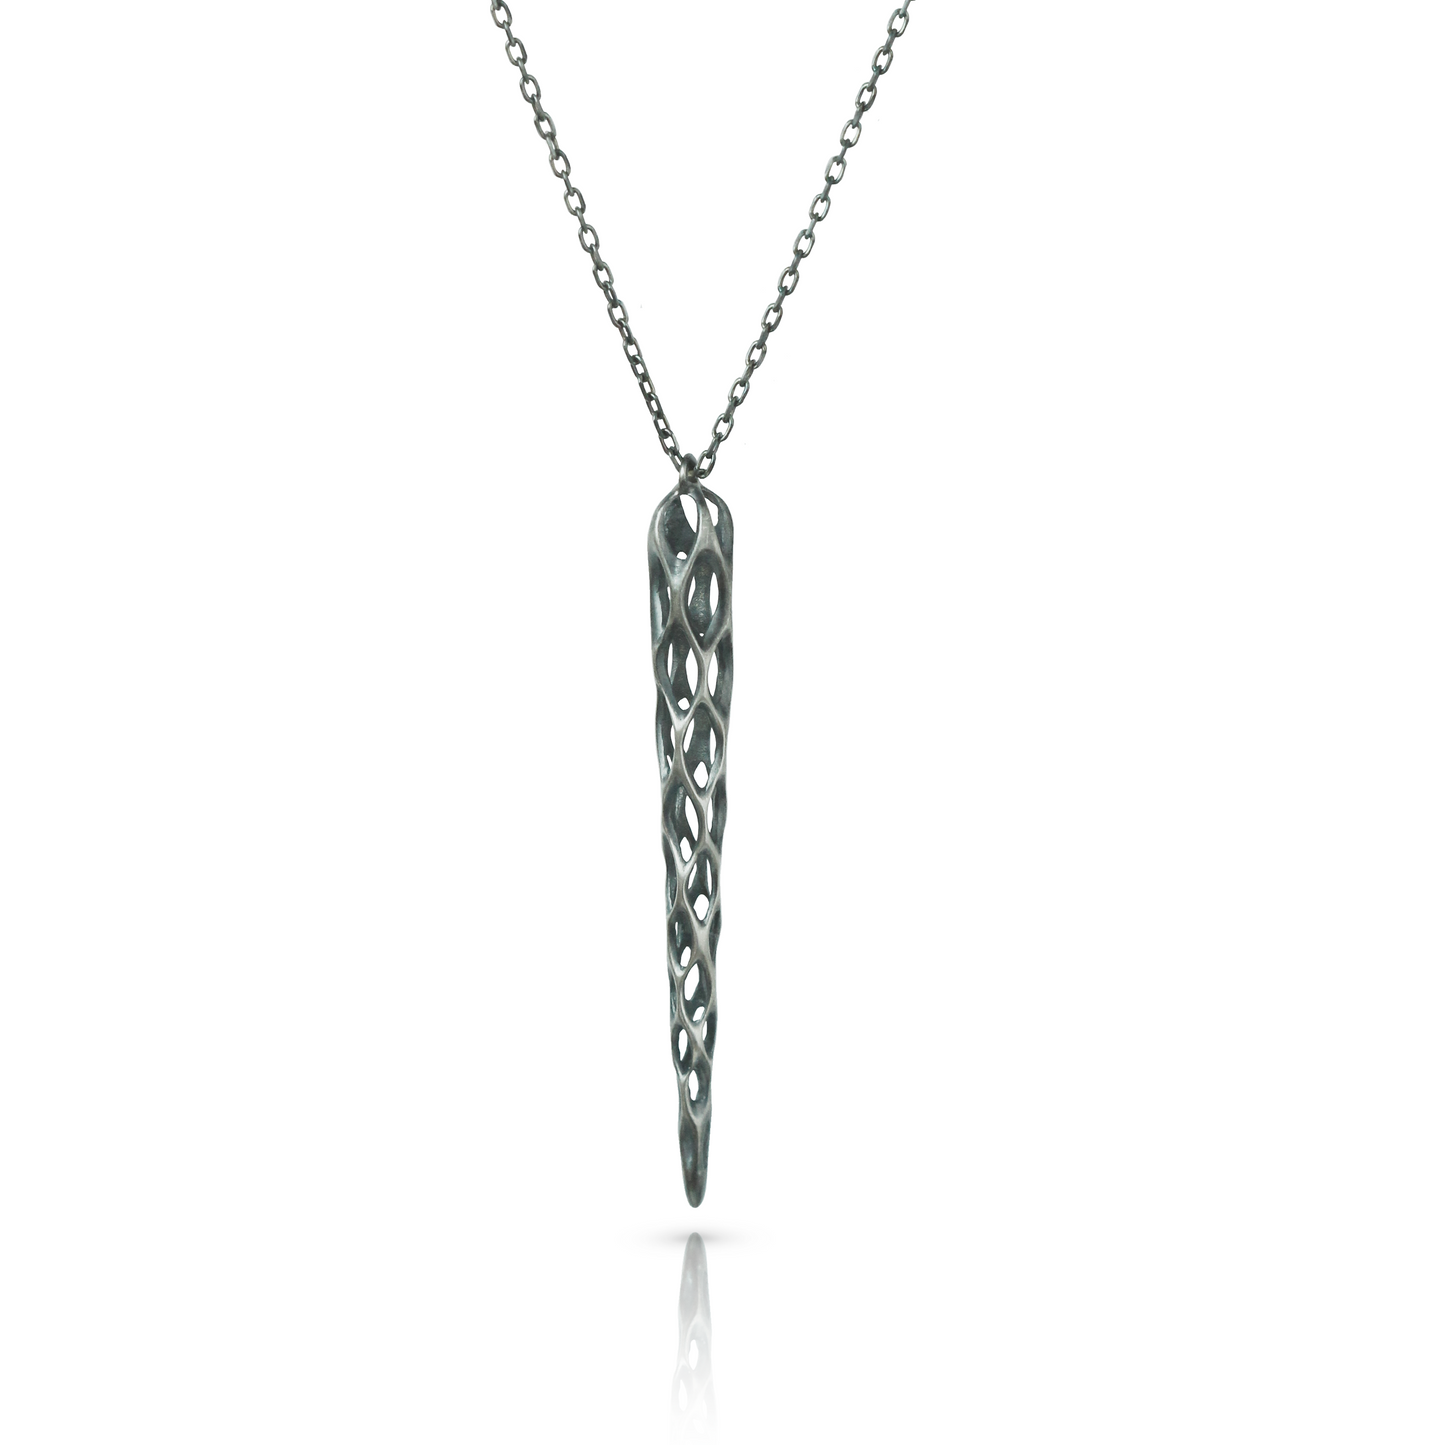 Large Cholla Pendant in Antique Sterling Silver on a 32" Chain